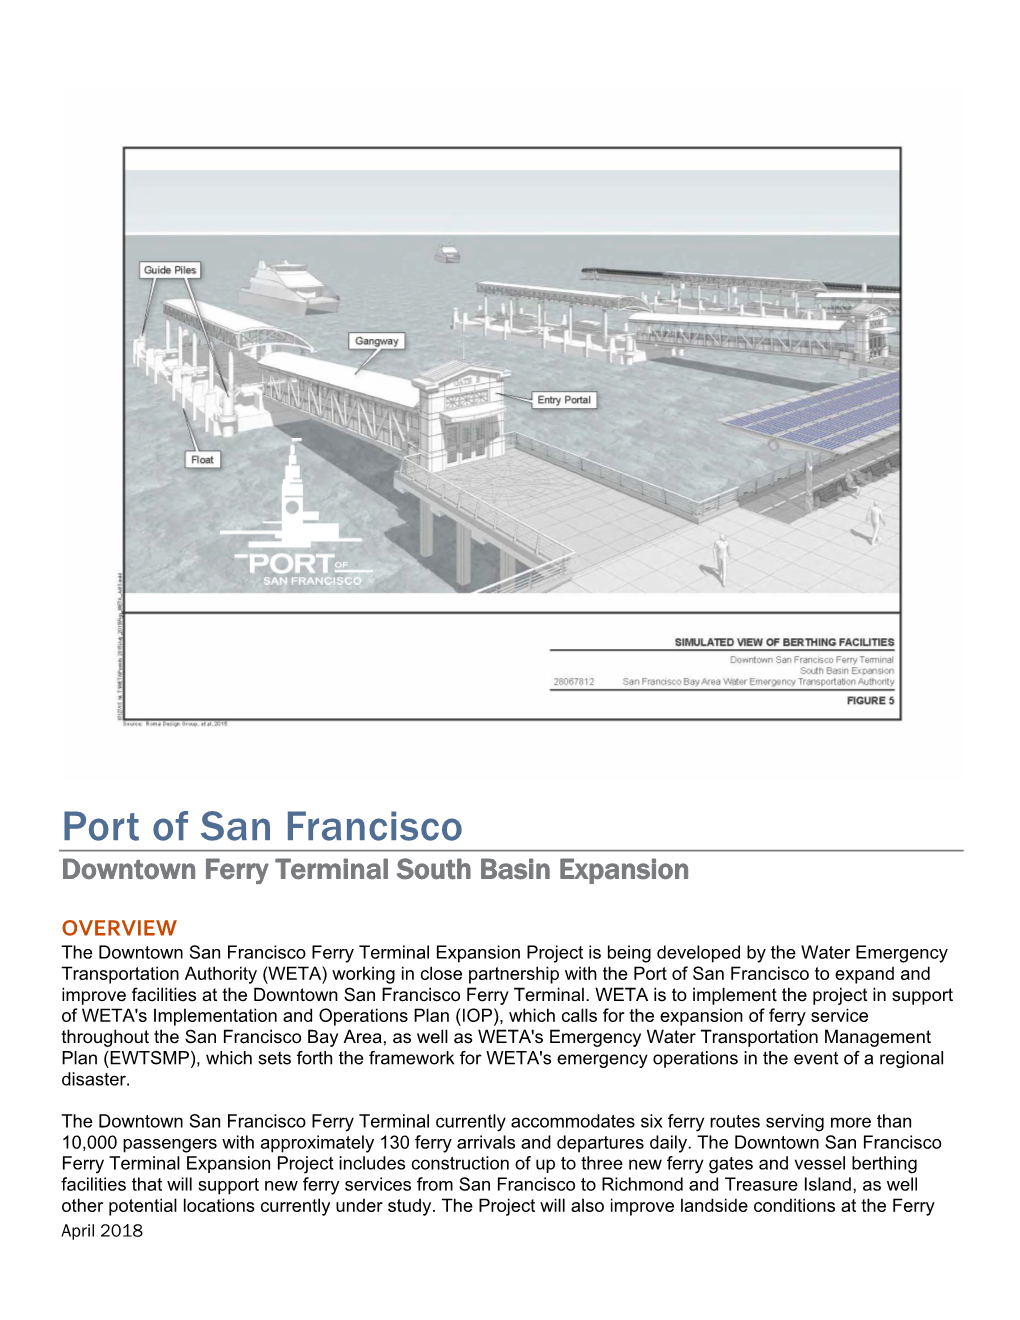 Downtown Ferry Terminal South Basin Expansion